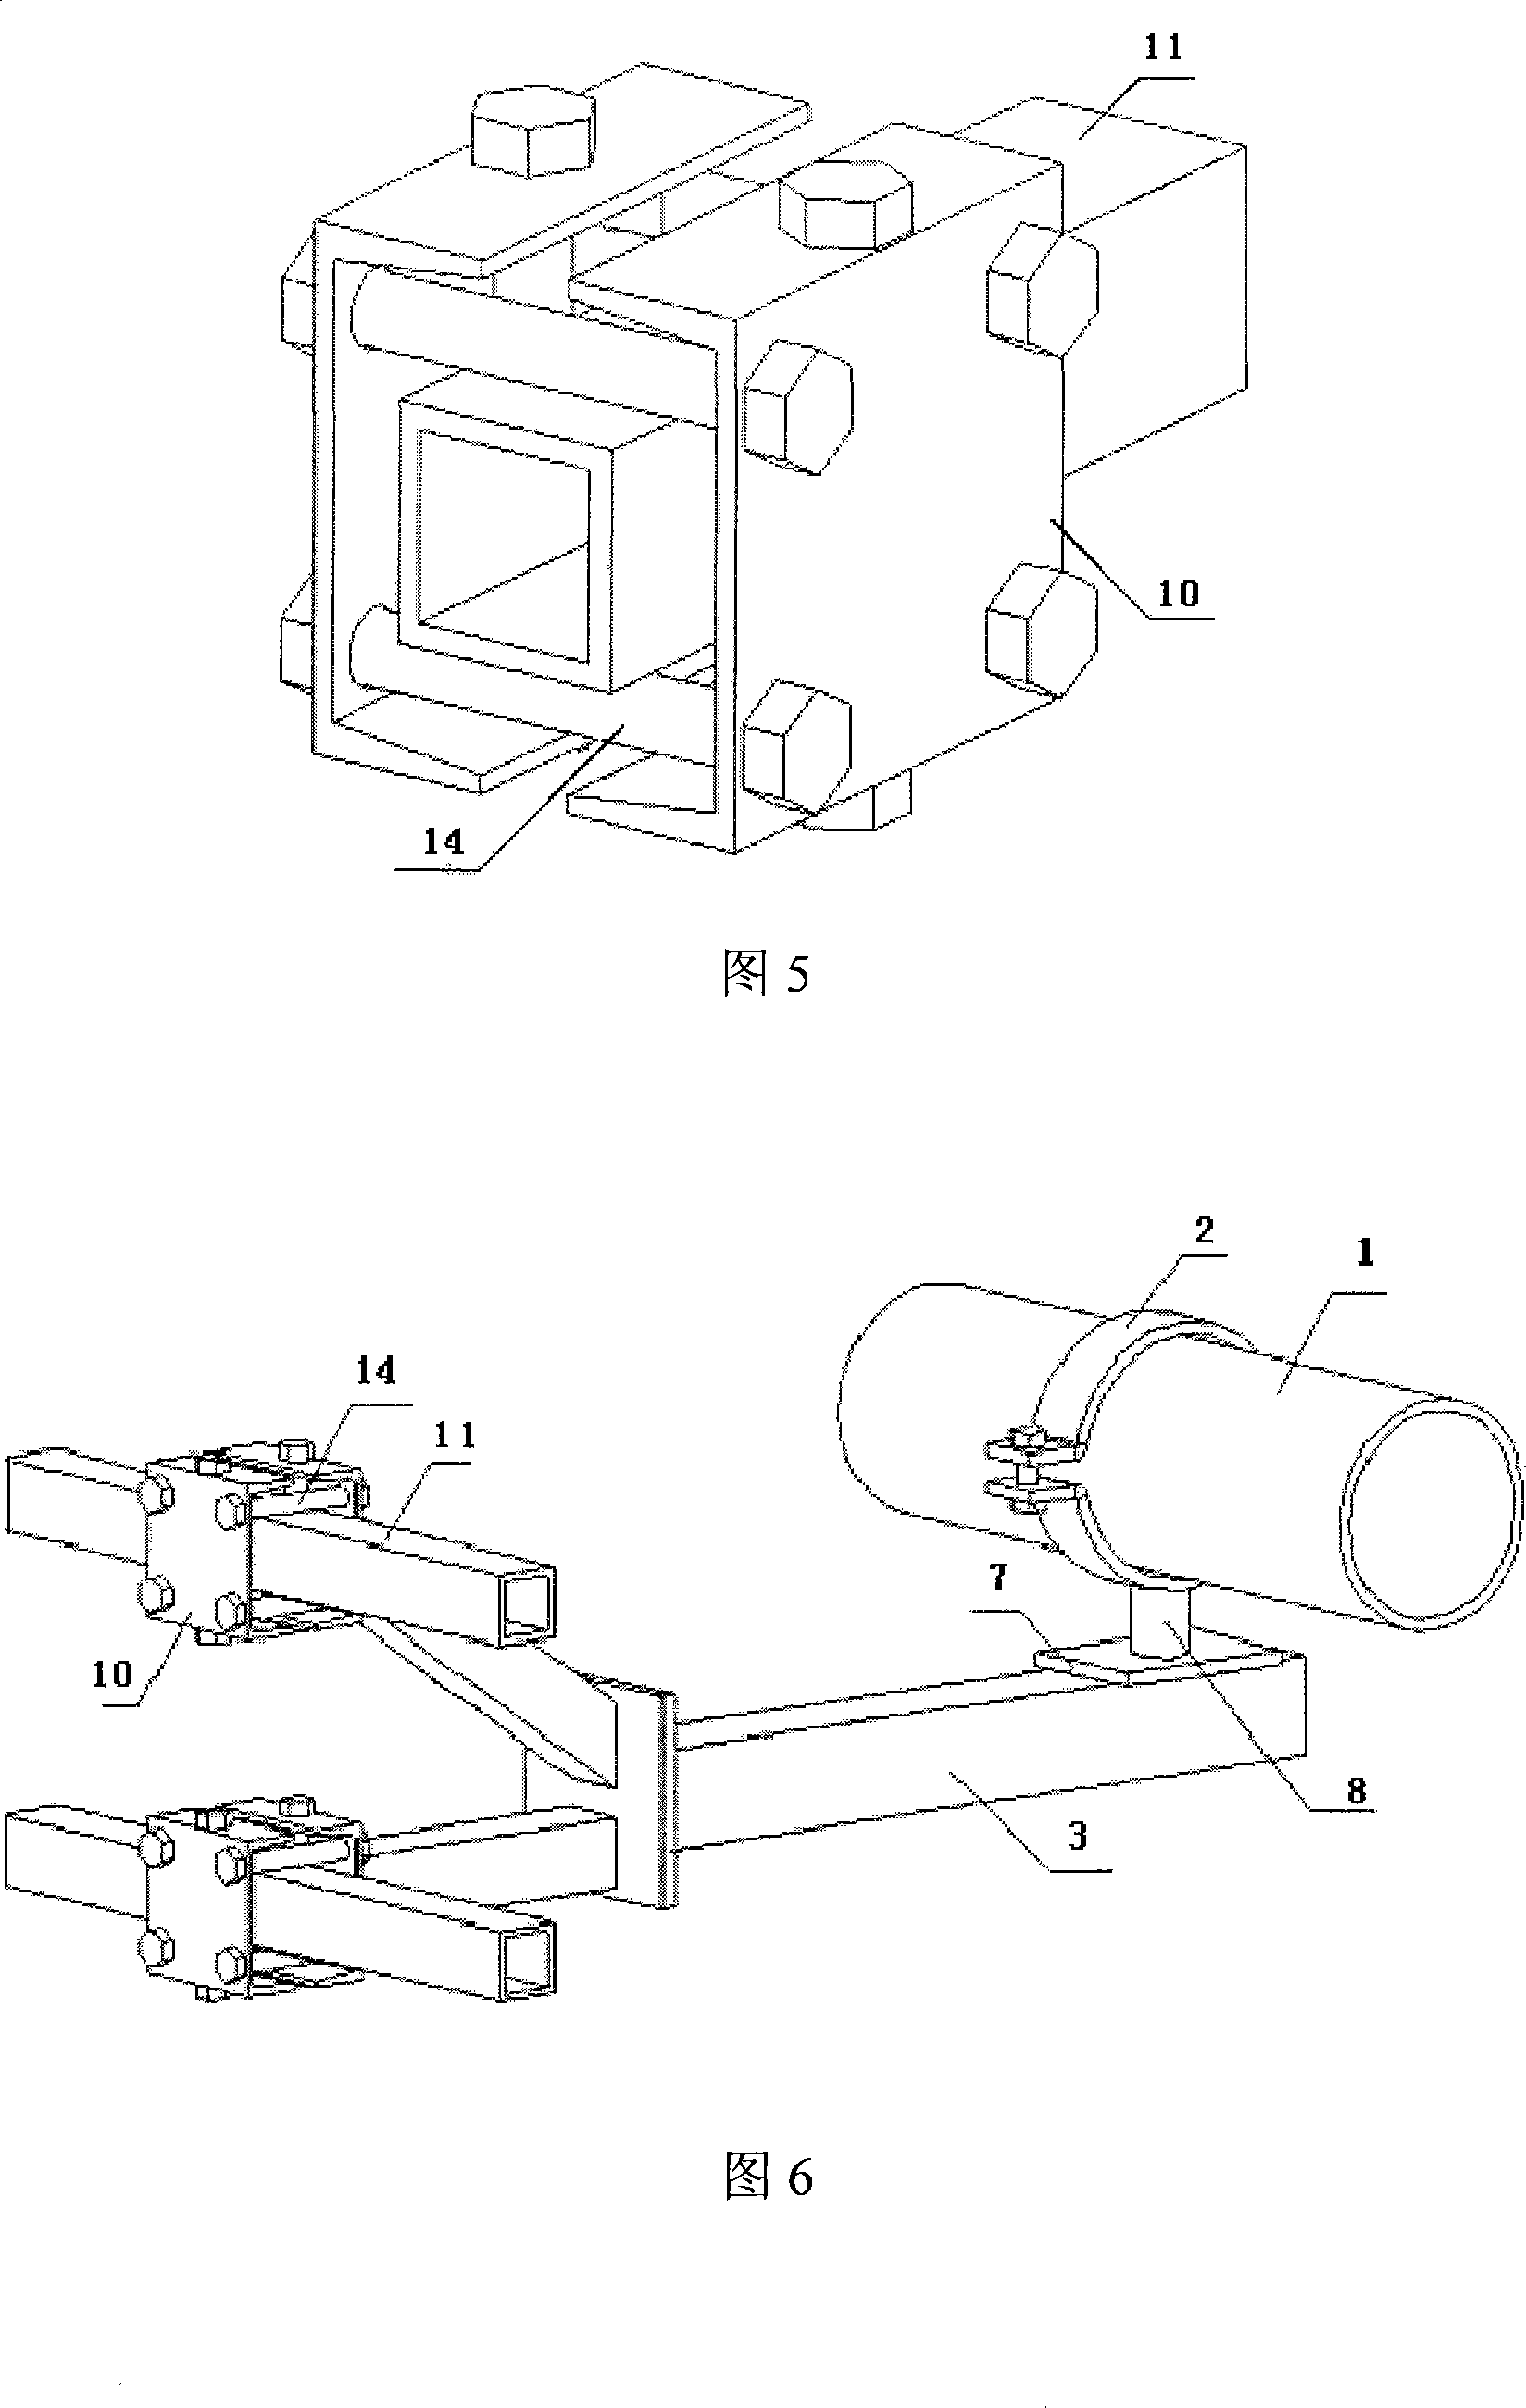 Conduit single arm sliding/guiding support assembly